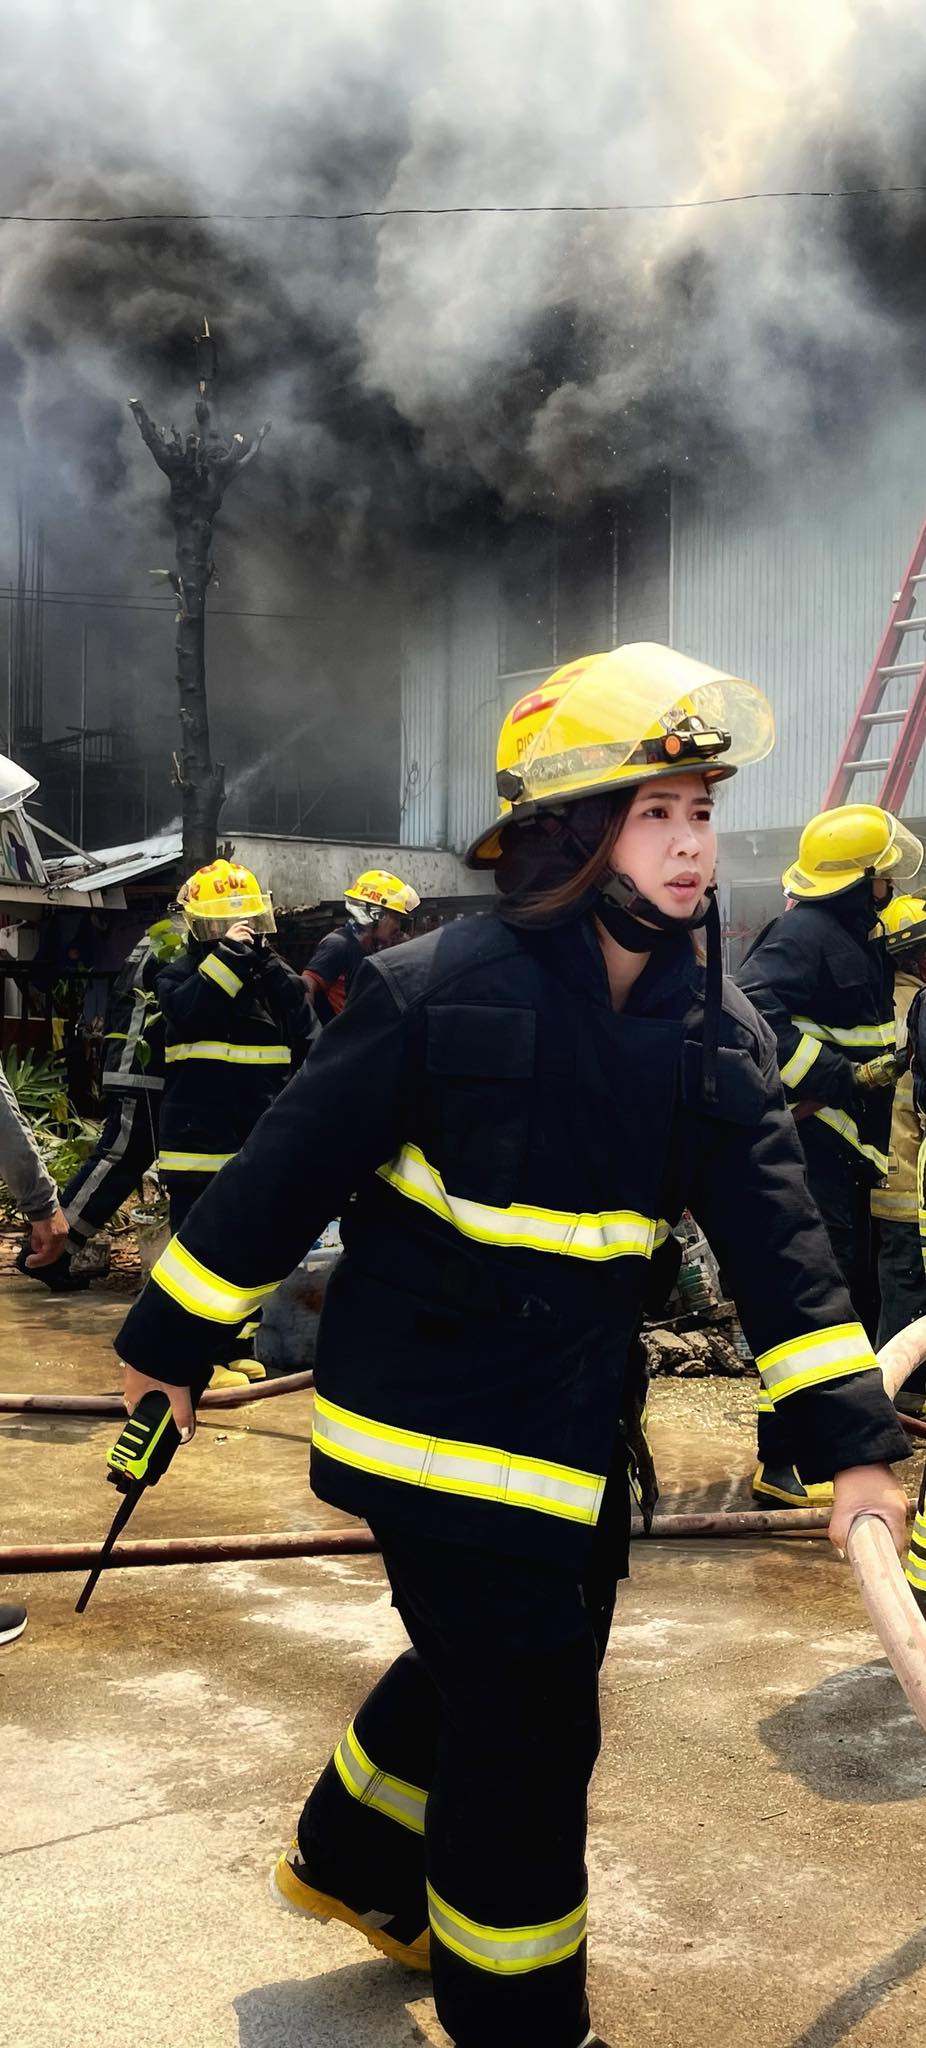 FO1 Novie Dagcuta, woman firefighter or one of the women firefighters of the CCFO. In photo is FO1 Novie Dagcuta responding with other CCFO firefighters to a fire in Cebu City.